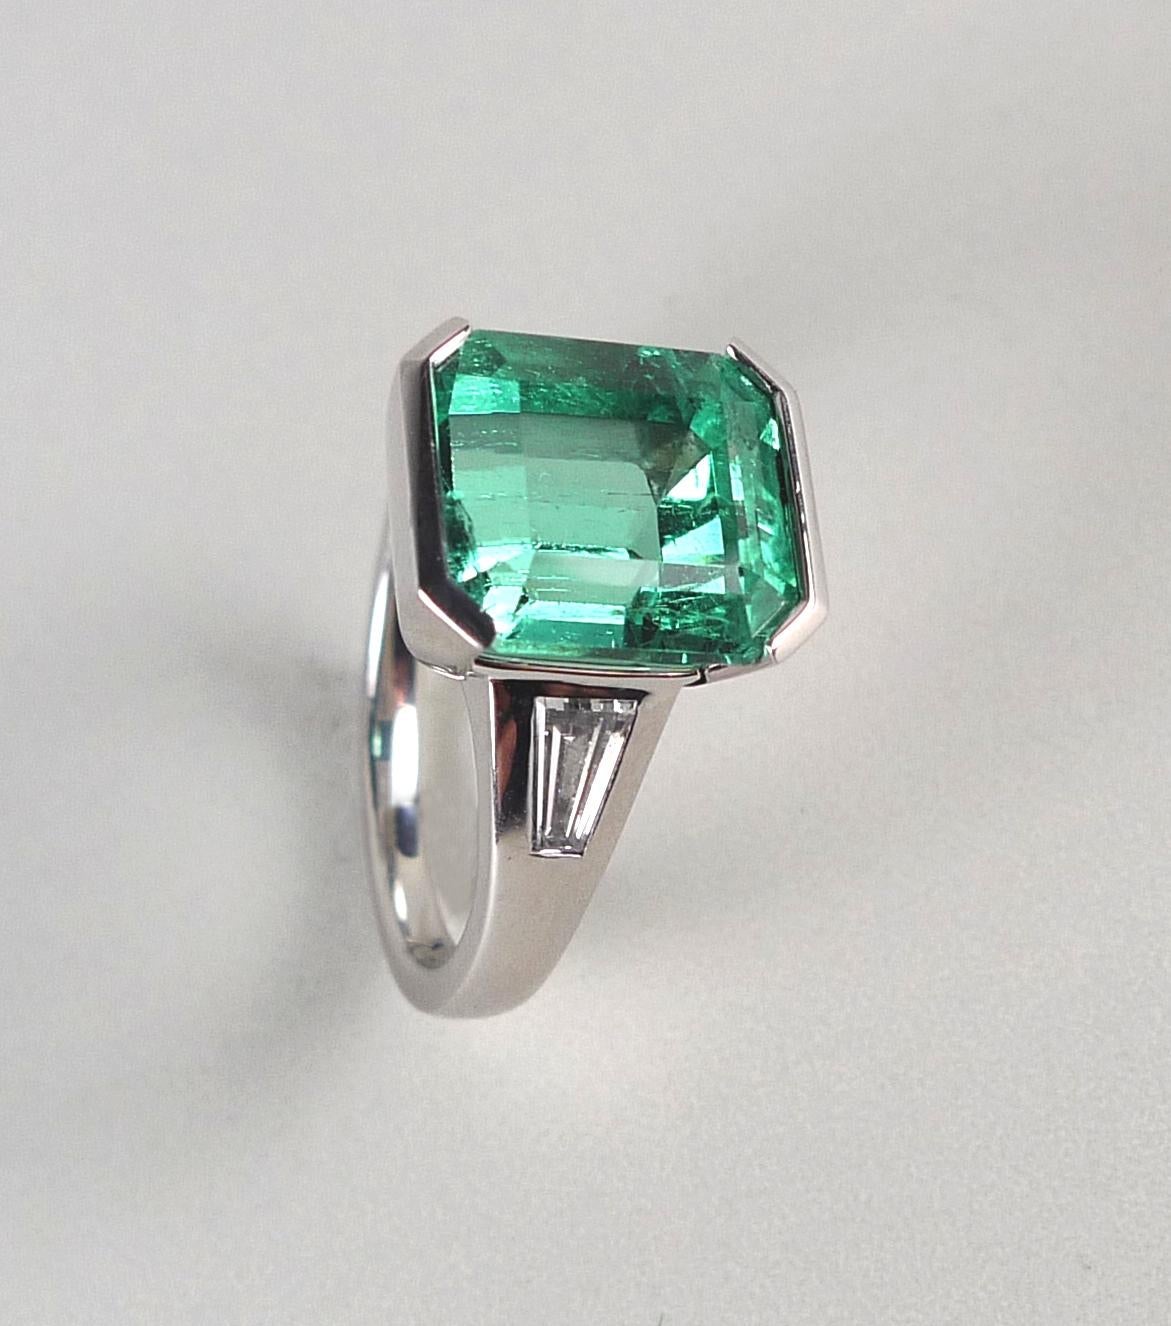 Elegant Lady is my name. Very elegant beautiful Colombian emerald and diamond ring, handcrafted in solid 18 karat white gold by TRUSTED GREEN. Showcasing a Paraiba like shining high quality natural Colombian emerald, coming from the famous Shivor